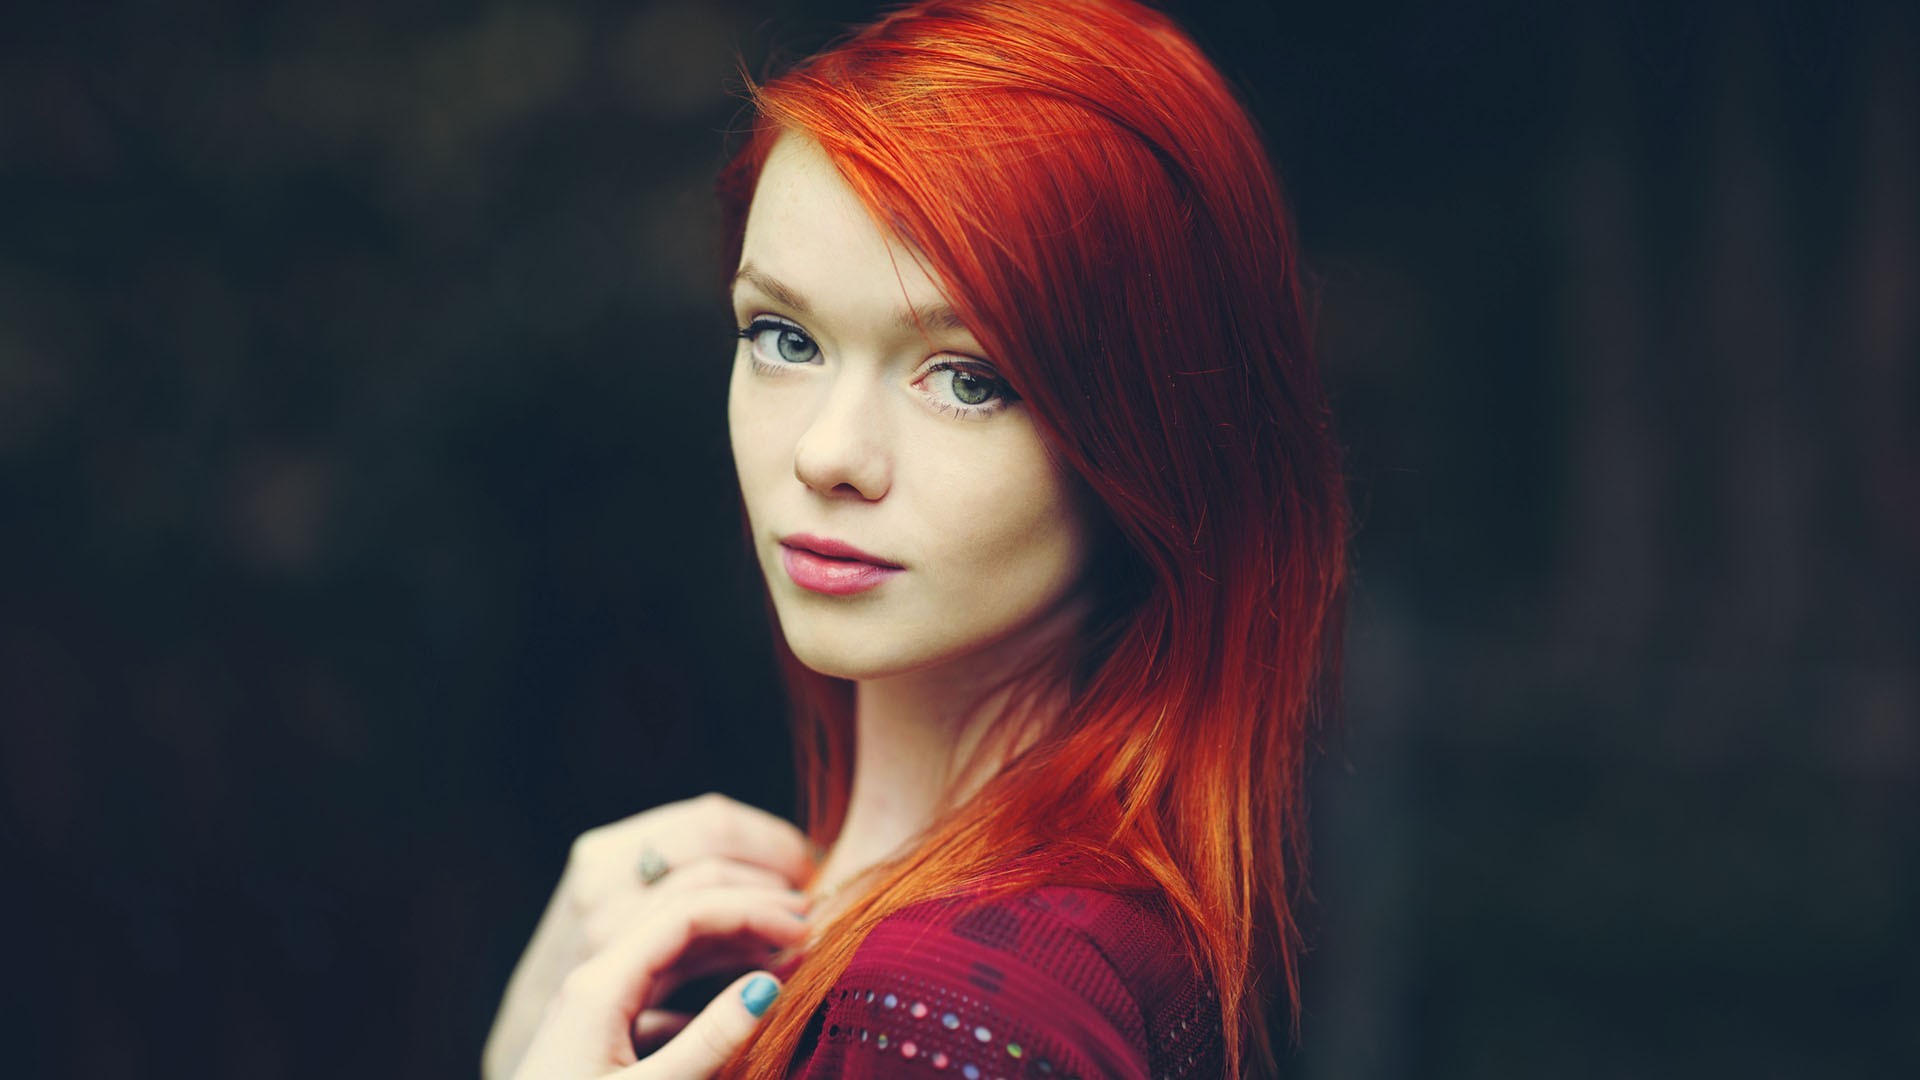 People 1920x1080 women Lass Suicide pale redhead green eyes looking at viewer dyed hair face Scottish Women long hair cyan nails British British women scottish